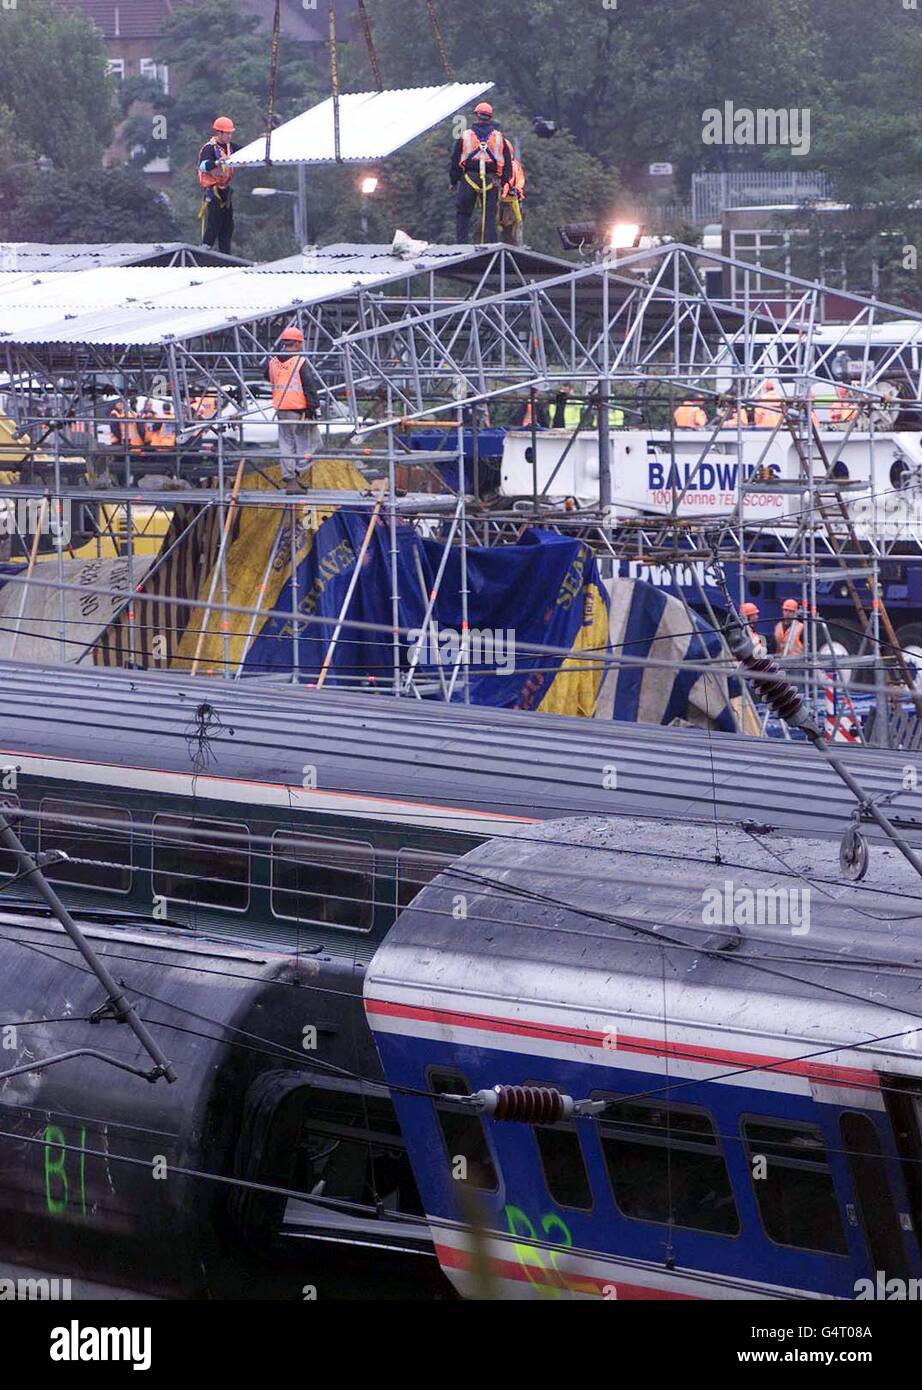 A scaffold canopy is erected around carriage H at the scene of the Paddington Rail Crash. Stock Photo